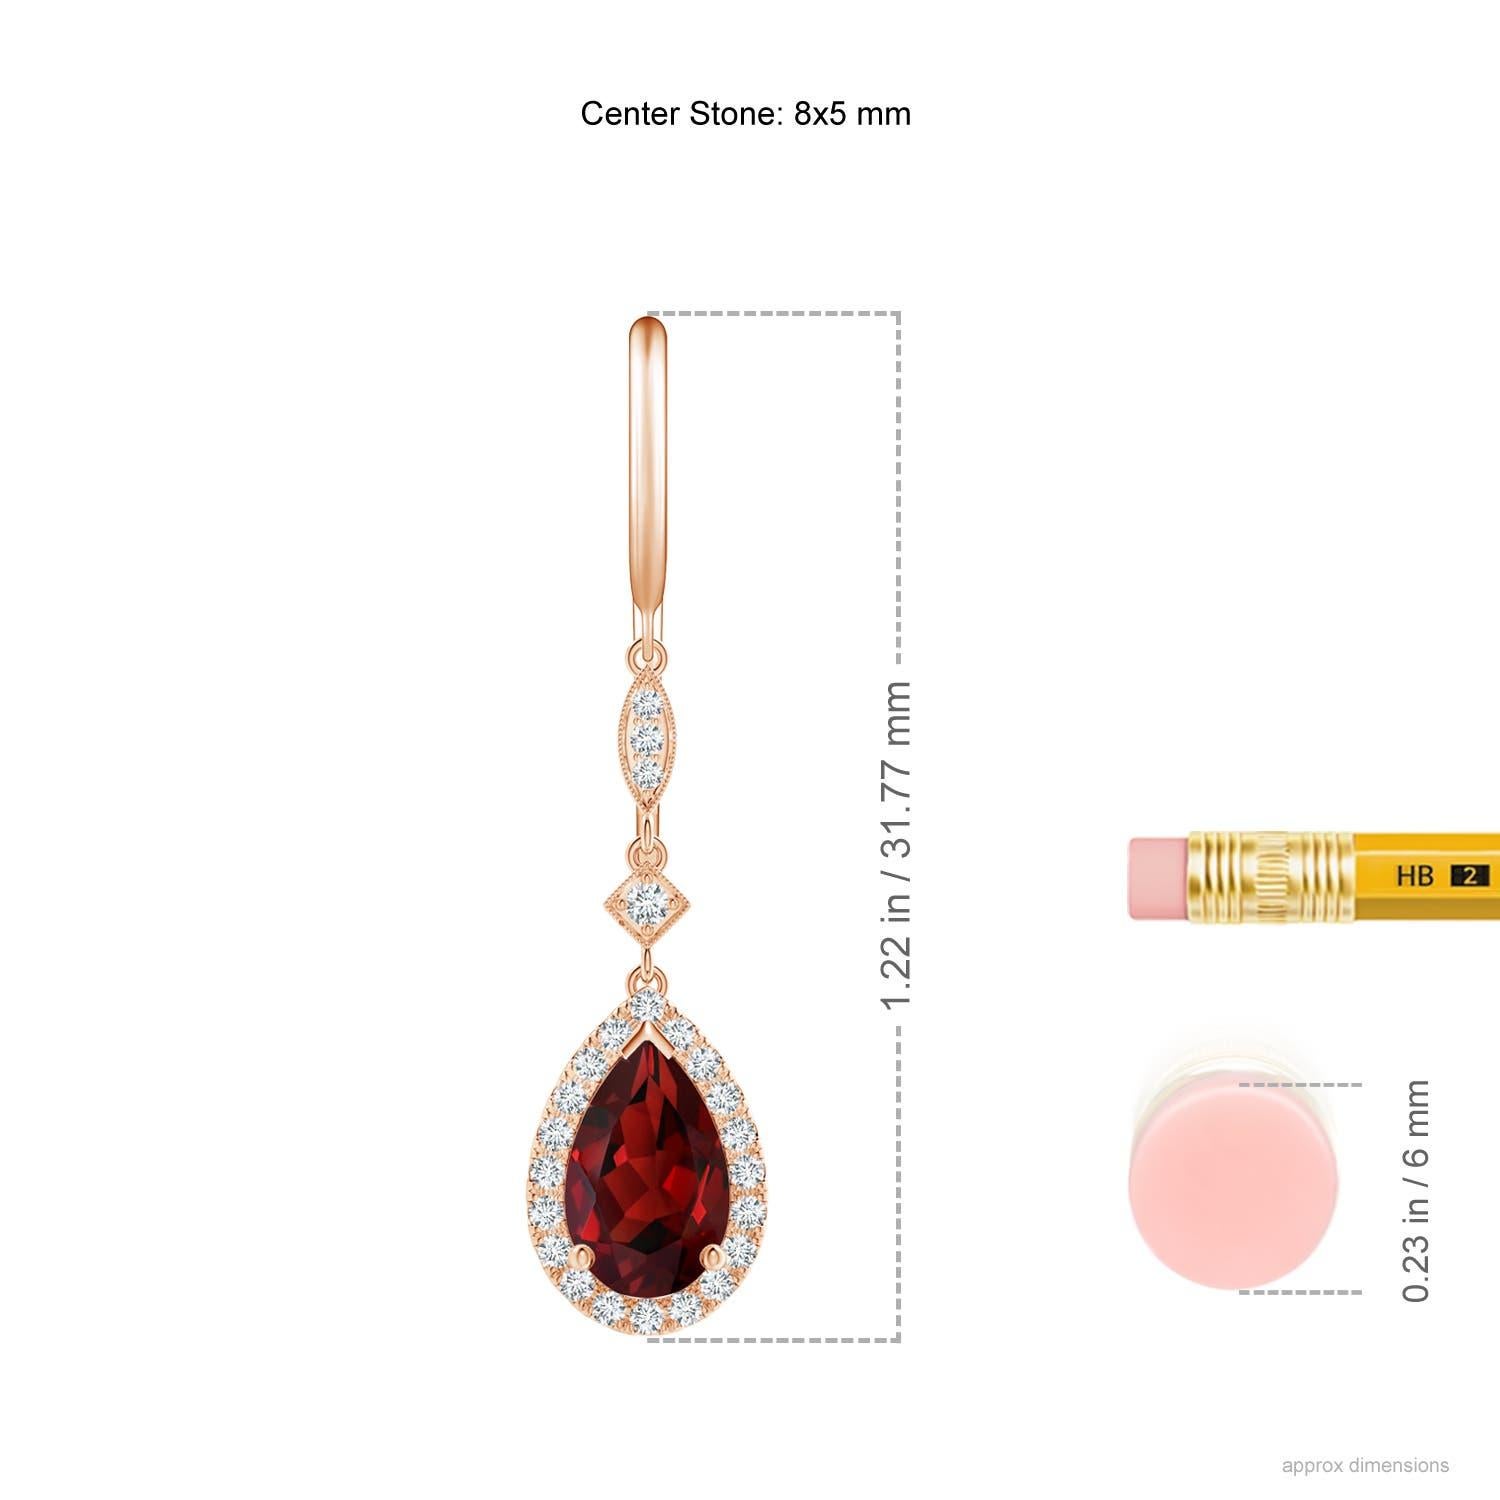 Dangling from shepherd hooks are these beautifully crafted garnet dangle earrings in 14K rose gold. Pear-shaped garnets are illuminated by a halo of precious white diamonds that create a remarkable contrast. They are connected to station diamonds